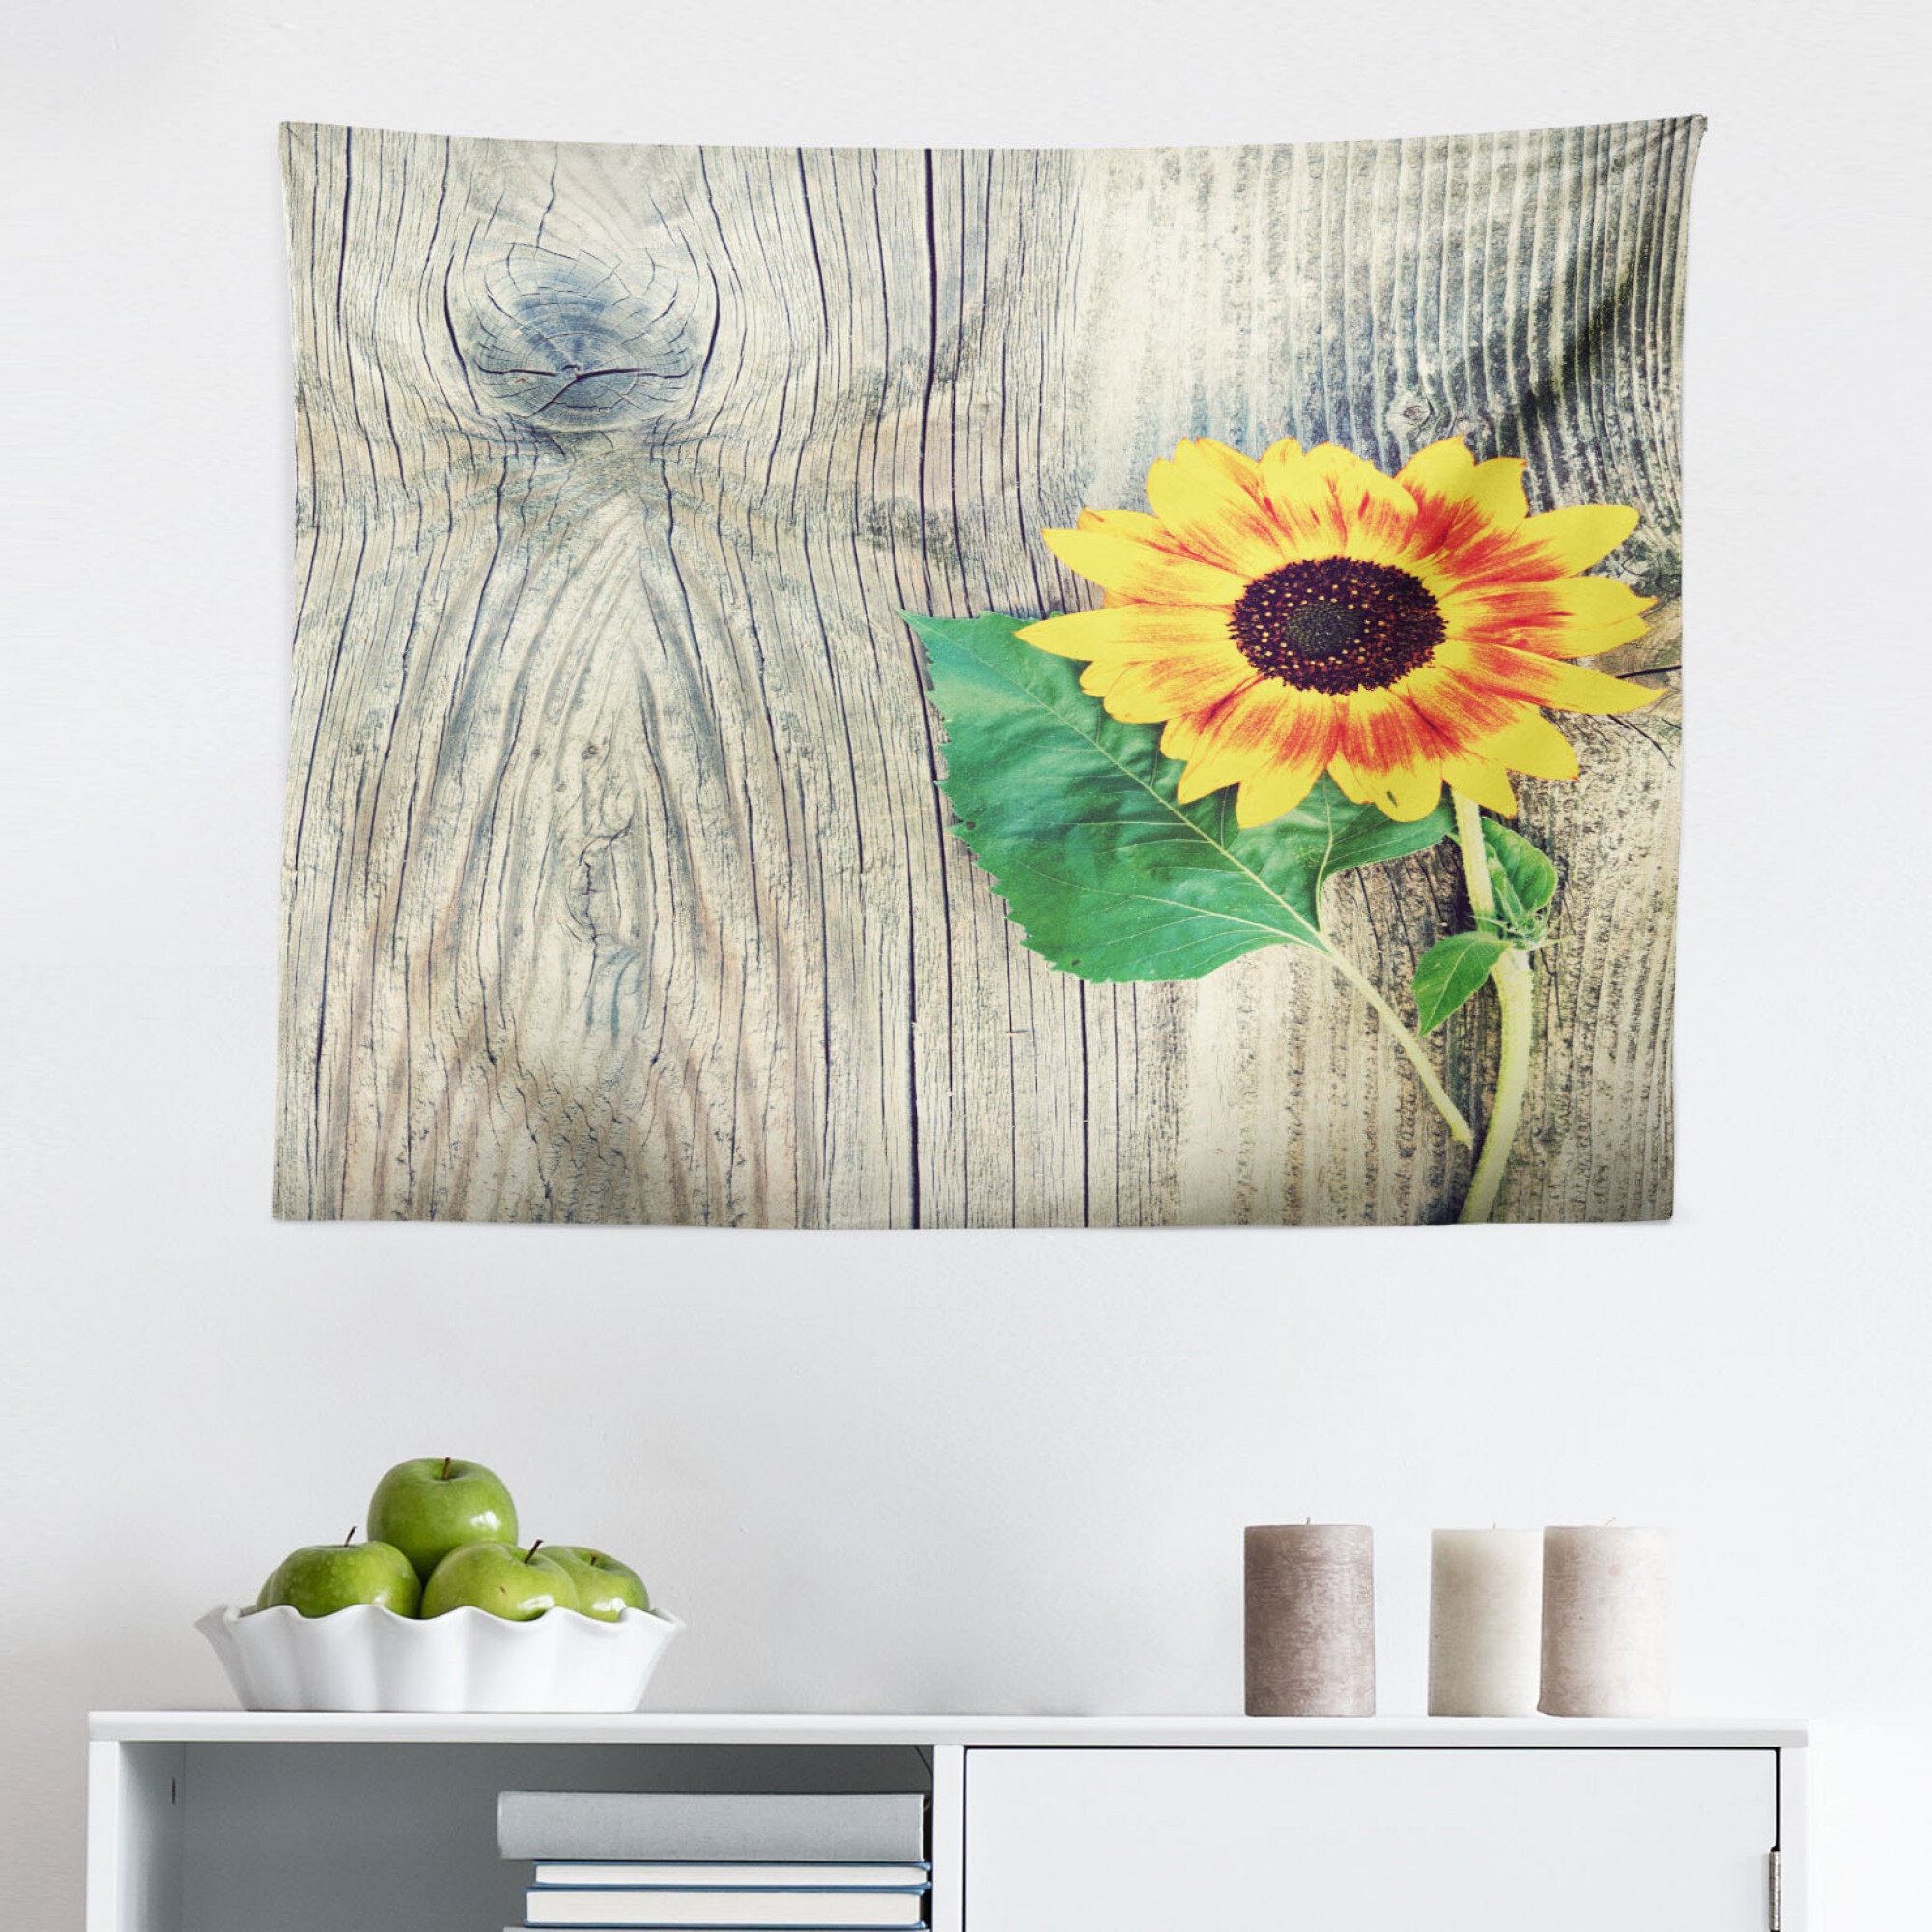 Blooming Sunflower Print Tapestry Room Wall Hanging Art Floral Tapestries Decor